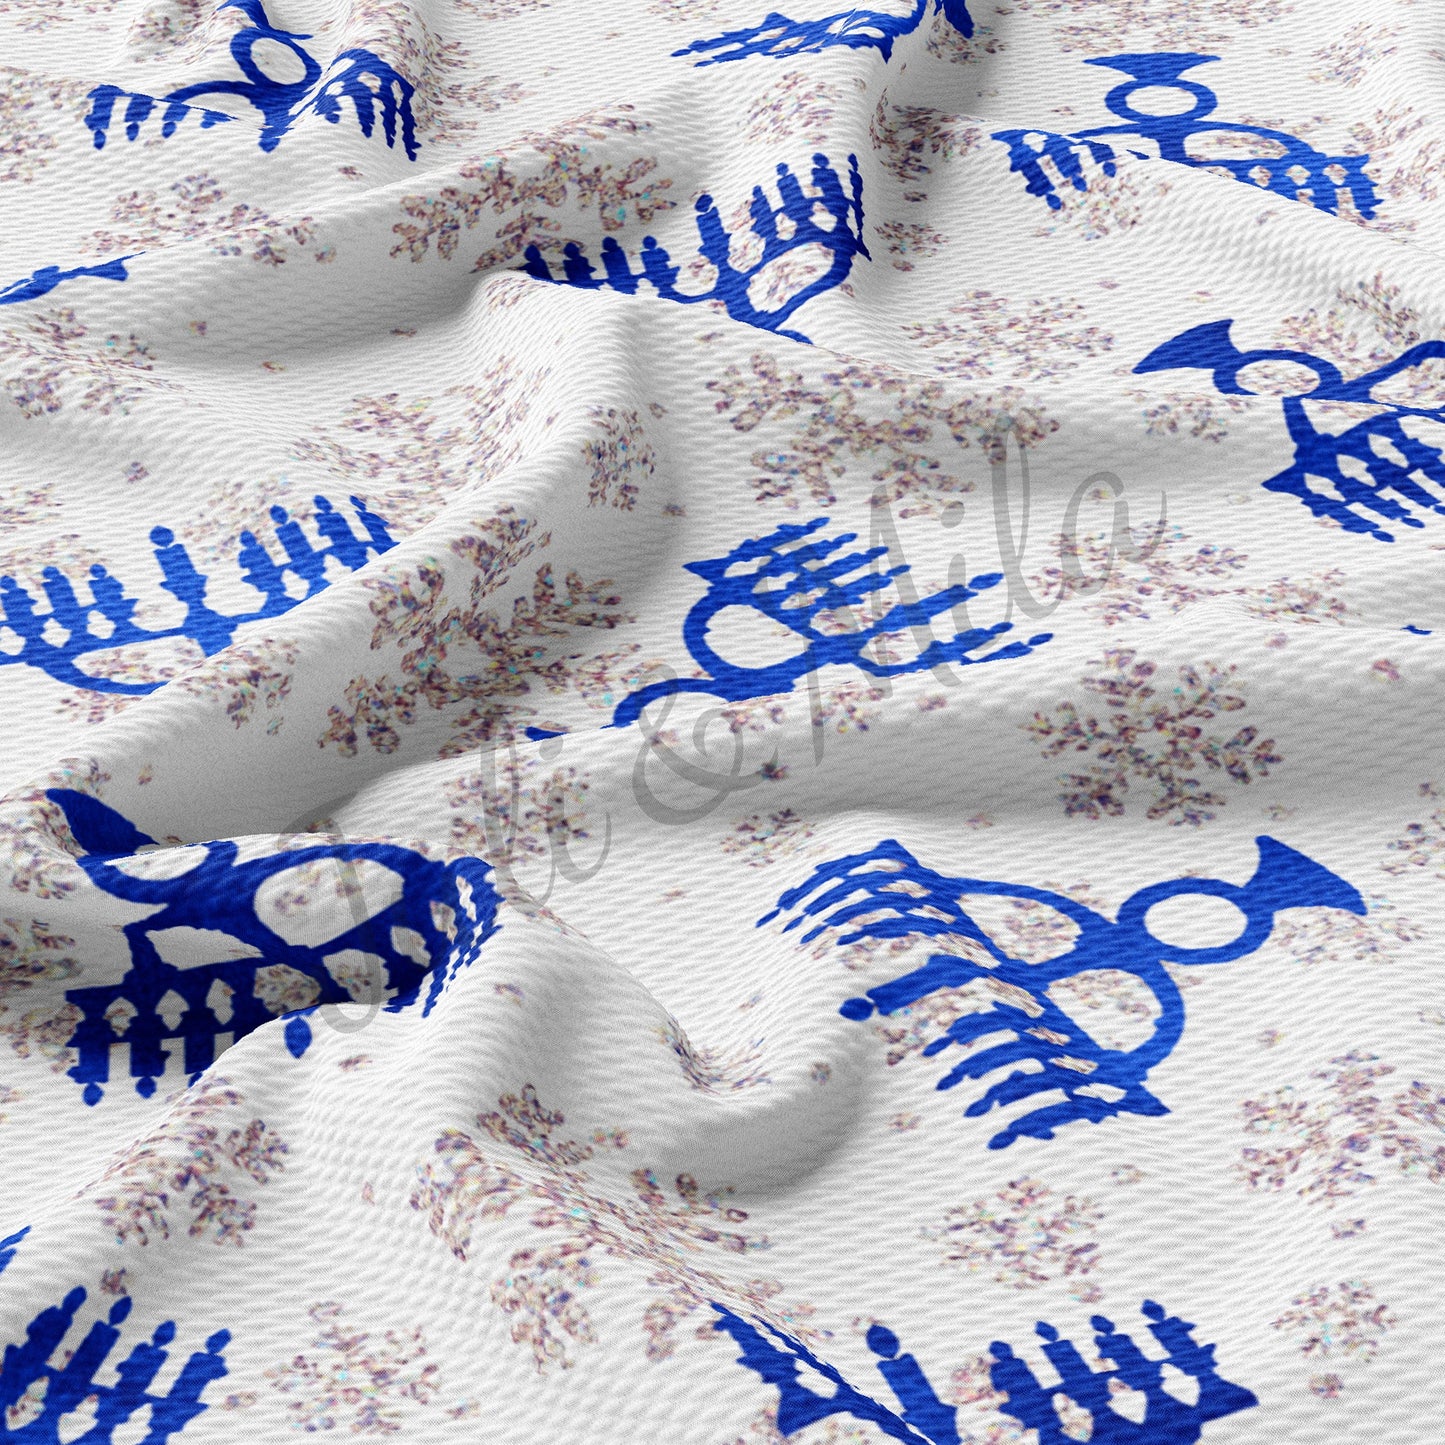 Hanukkah Liverpool Bullet Textured Fabric by the yard 4Way Stretch Solid Strip Thick Knit Jersey Liverpool Fabric christmaseries202